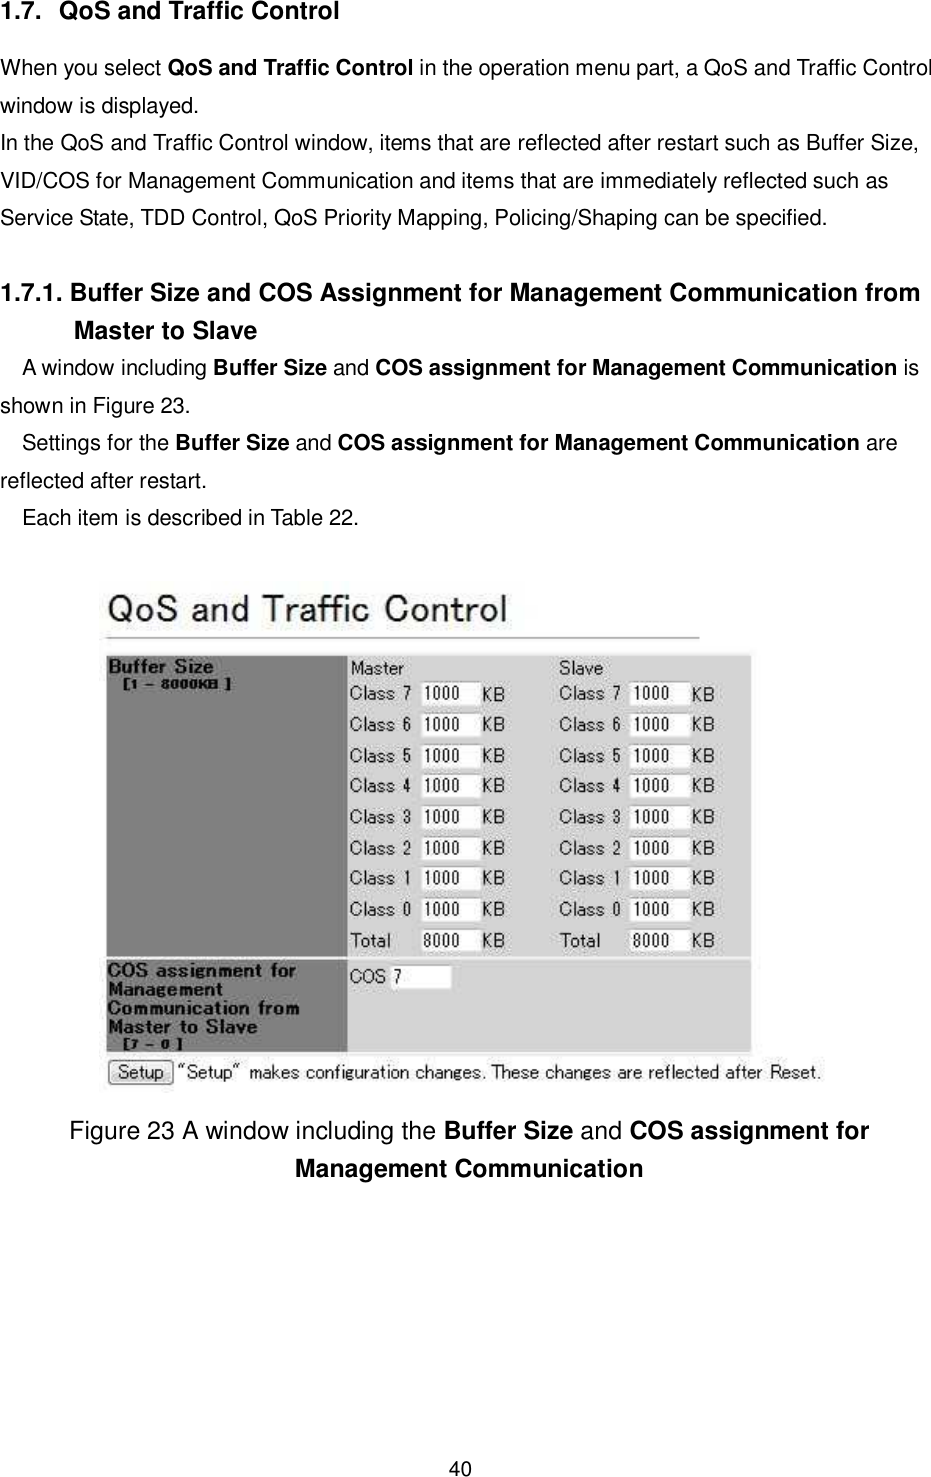    40  1.7.  QoS and Traffic Control When you select QoS and Traffic Control in the operation menu part, a QoS and Traffic Control window is displayed. In the QoS and Traffic Control window, items that are reflected after restart such as Buffer Size, VID/COS for Management Communication and items that are immediately reflected such as Service State, TDD Control, QoS Priority Mapping, Policing/Shaping can be specified.  1.7.1. Buffer Size and COS Assignment for Management Communication from Master to Slave A window including Buffer Size and COS assignment for Management Communication is shown in Figure 23. Settings for the Buffer Size and COS assignment for Management Communication are reflected after restart. Each item is described in Table 22.   Figure 23 A window including the Buffer Size and COS assignment for Management Communication 